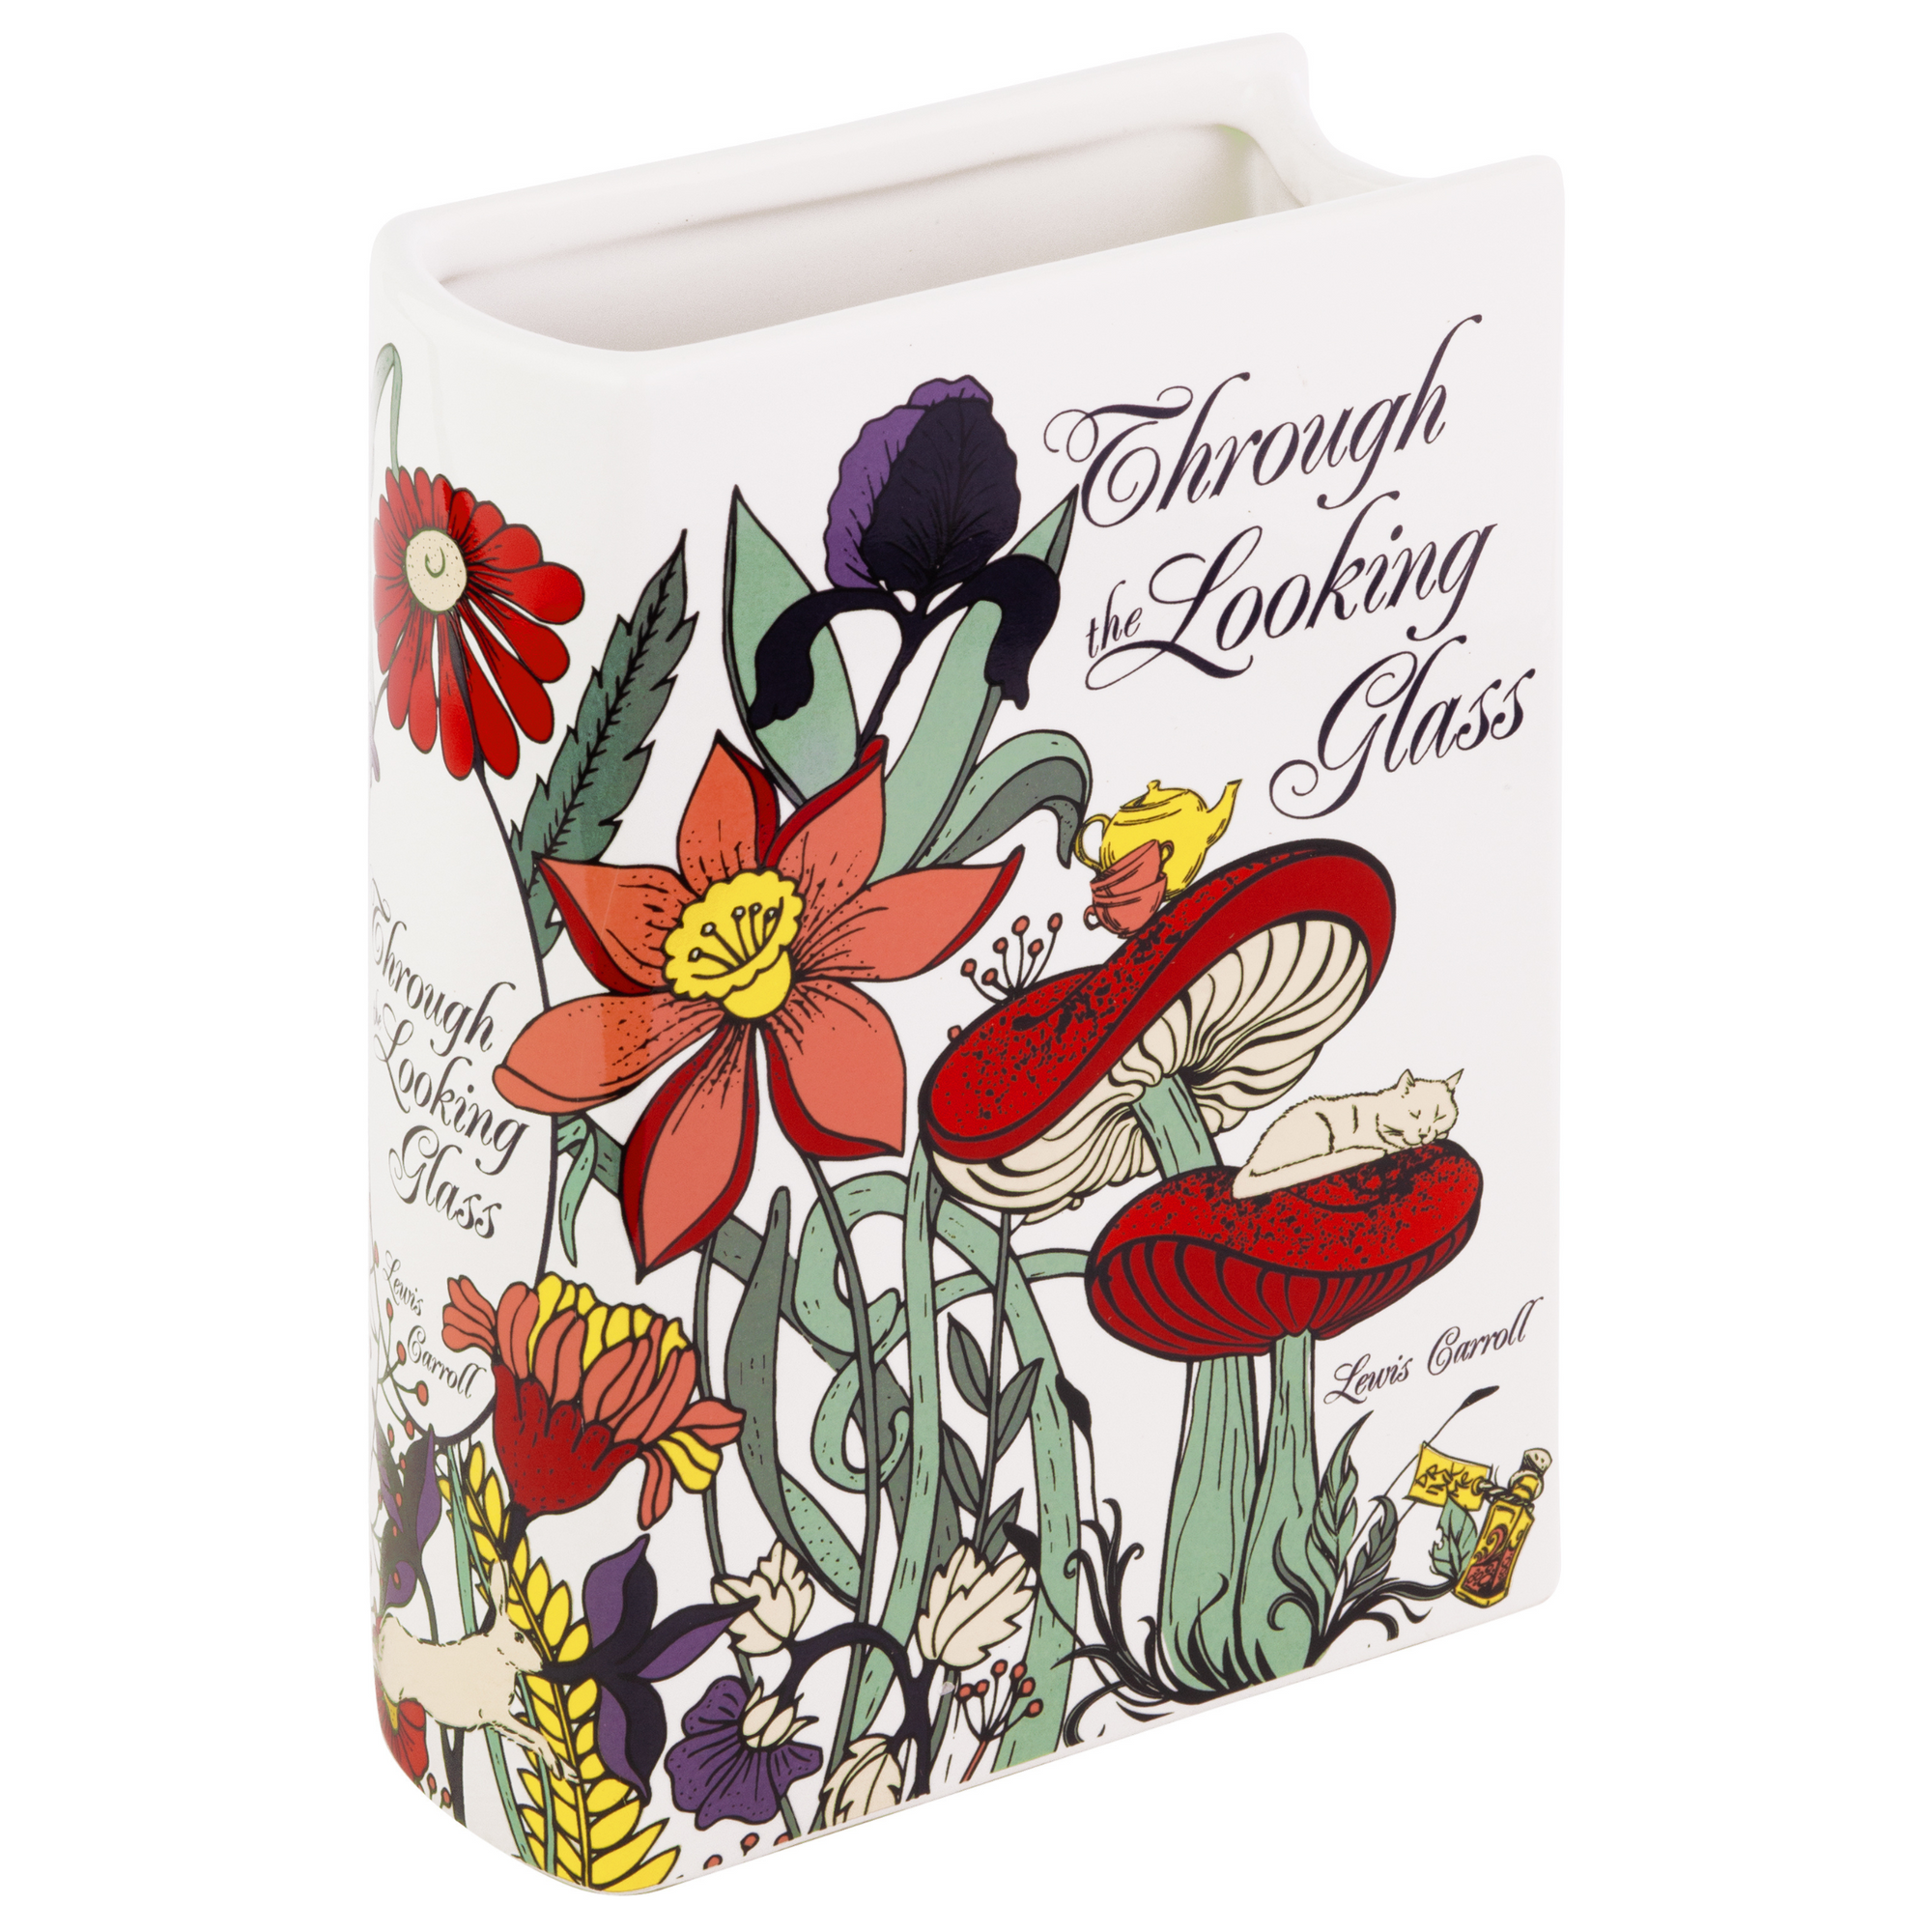 ceramic book vase printed in bold flowers with the novel title Through the Looking-Glass by Lewis Carroll